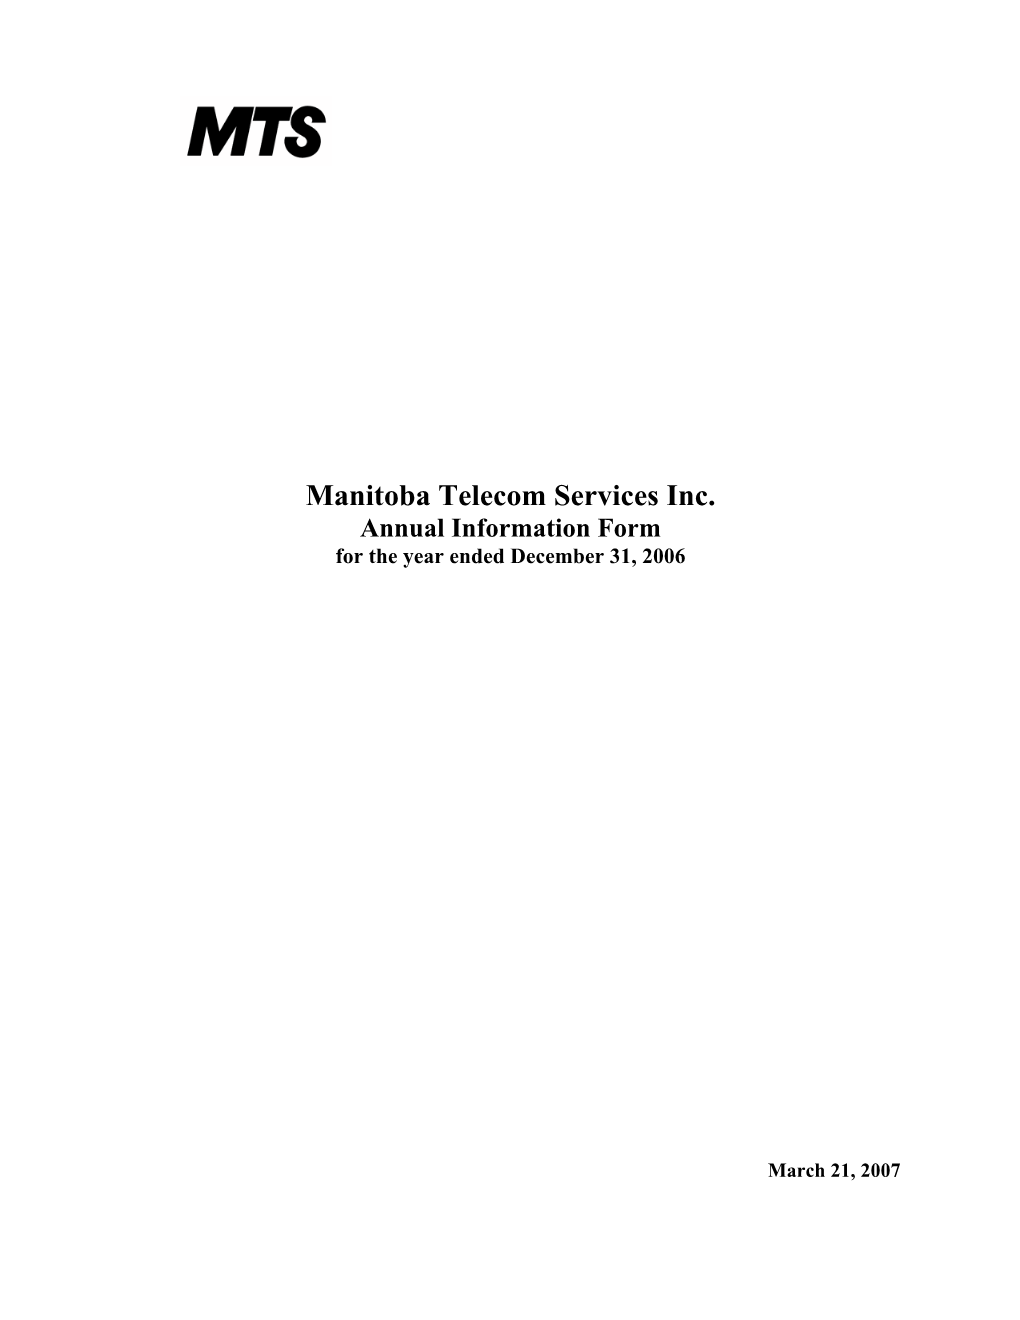 Manitoba Telecom Services Inc. Annual Information Form for the Year Ended December 31, 2006